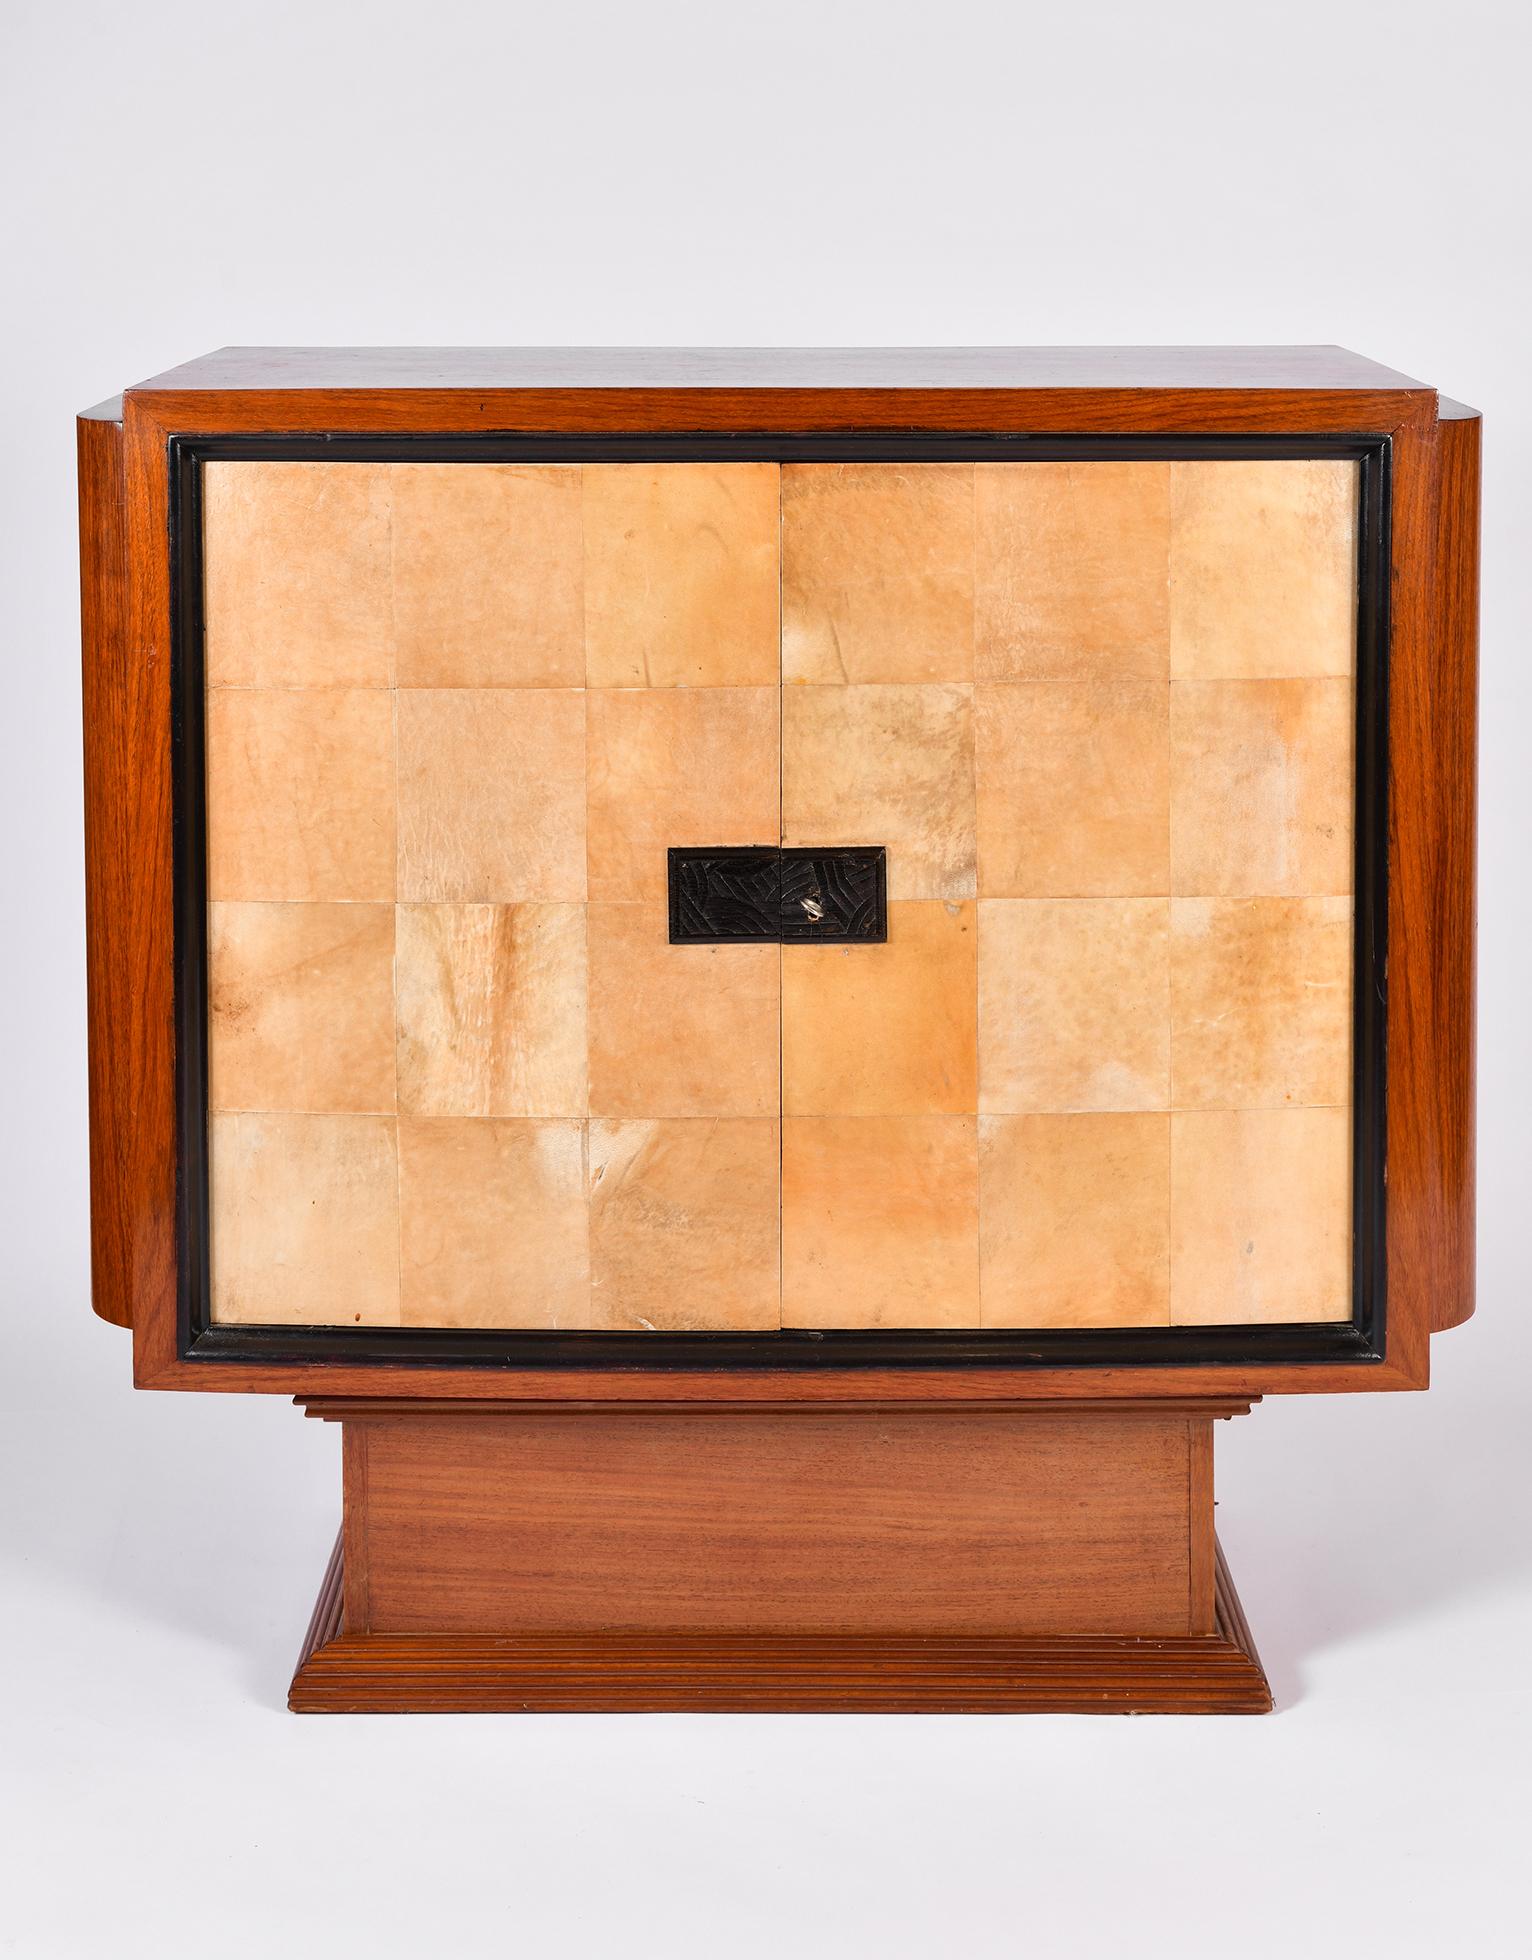 An Art Deco mahogany and velum cabinet,
The two door clad in velum revealing a shelf and a drawers, adorned with intricate geometric marquetry and clad in velum.
France, circa 1930.